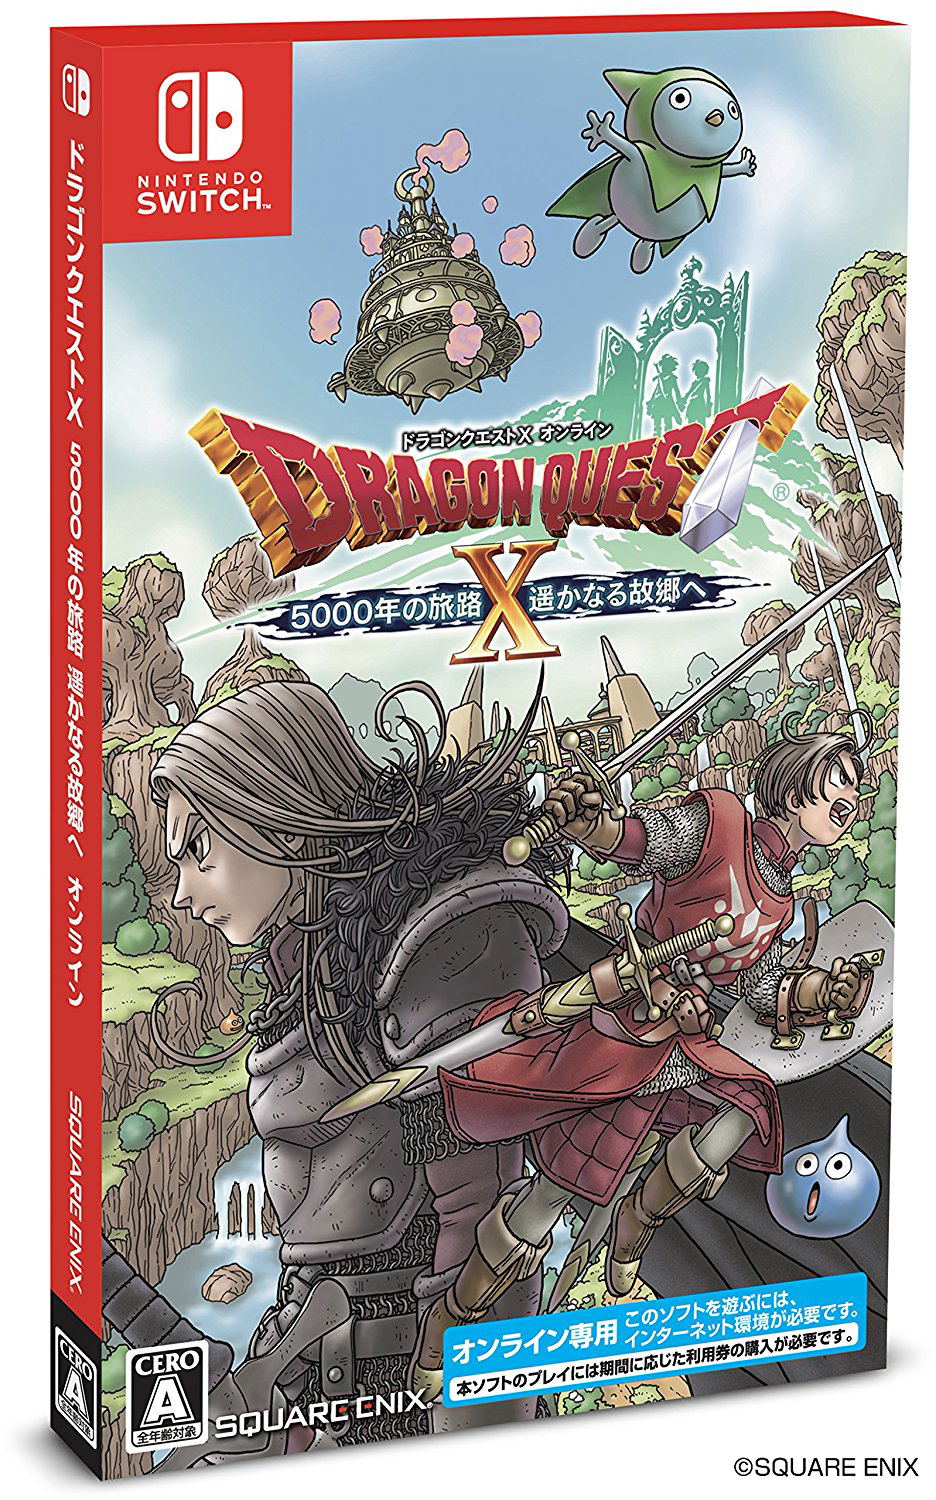 Dragon Quest X: 5000 Year Journey to a Faraway Hometown (Japan)